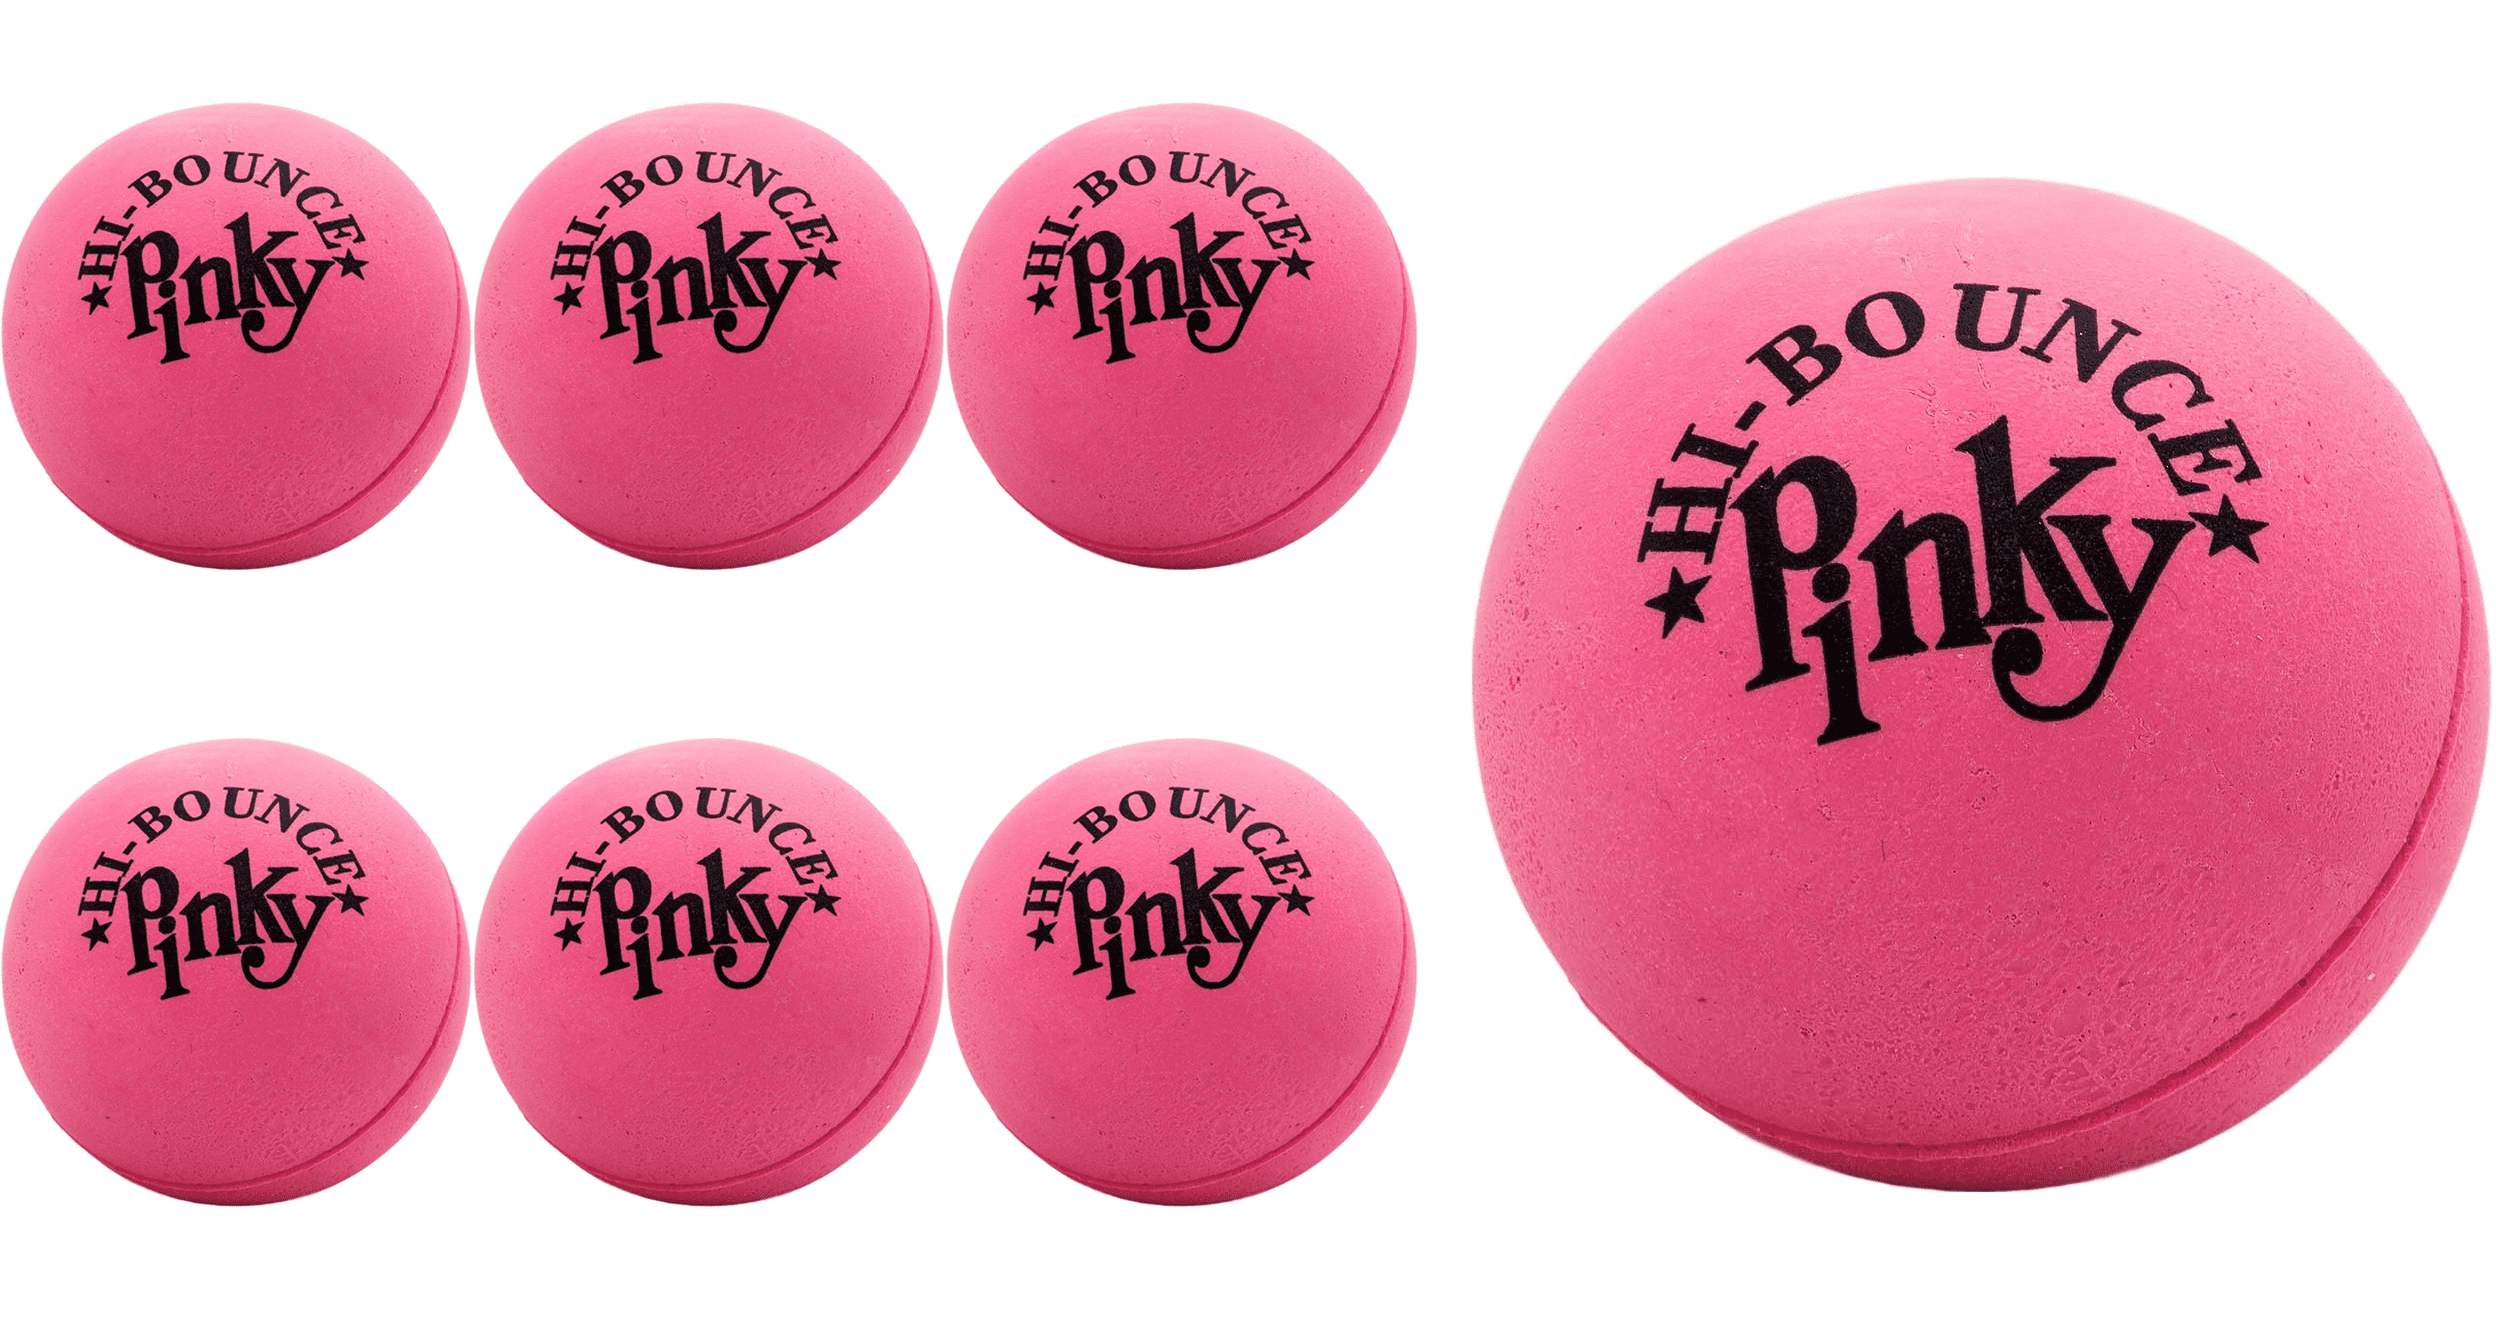 Pinky Ball 2.5" Hi Bounce Large Pink Rubber Balls for Play or Massag Pack of 6 